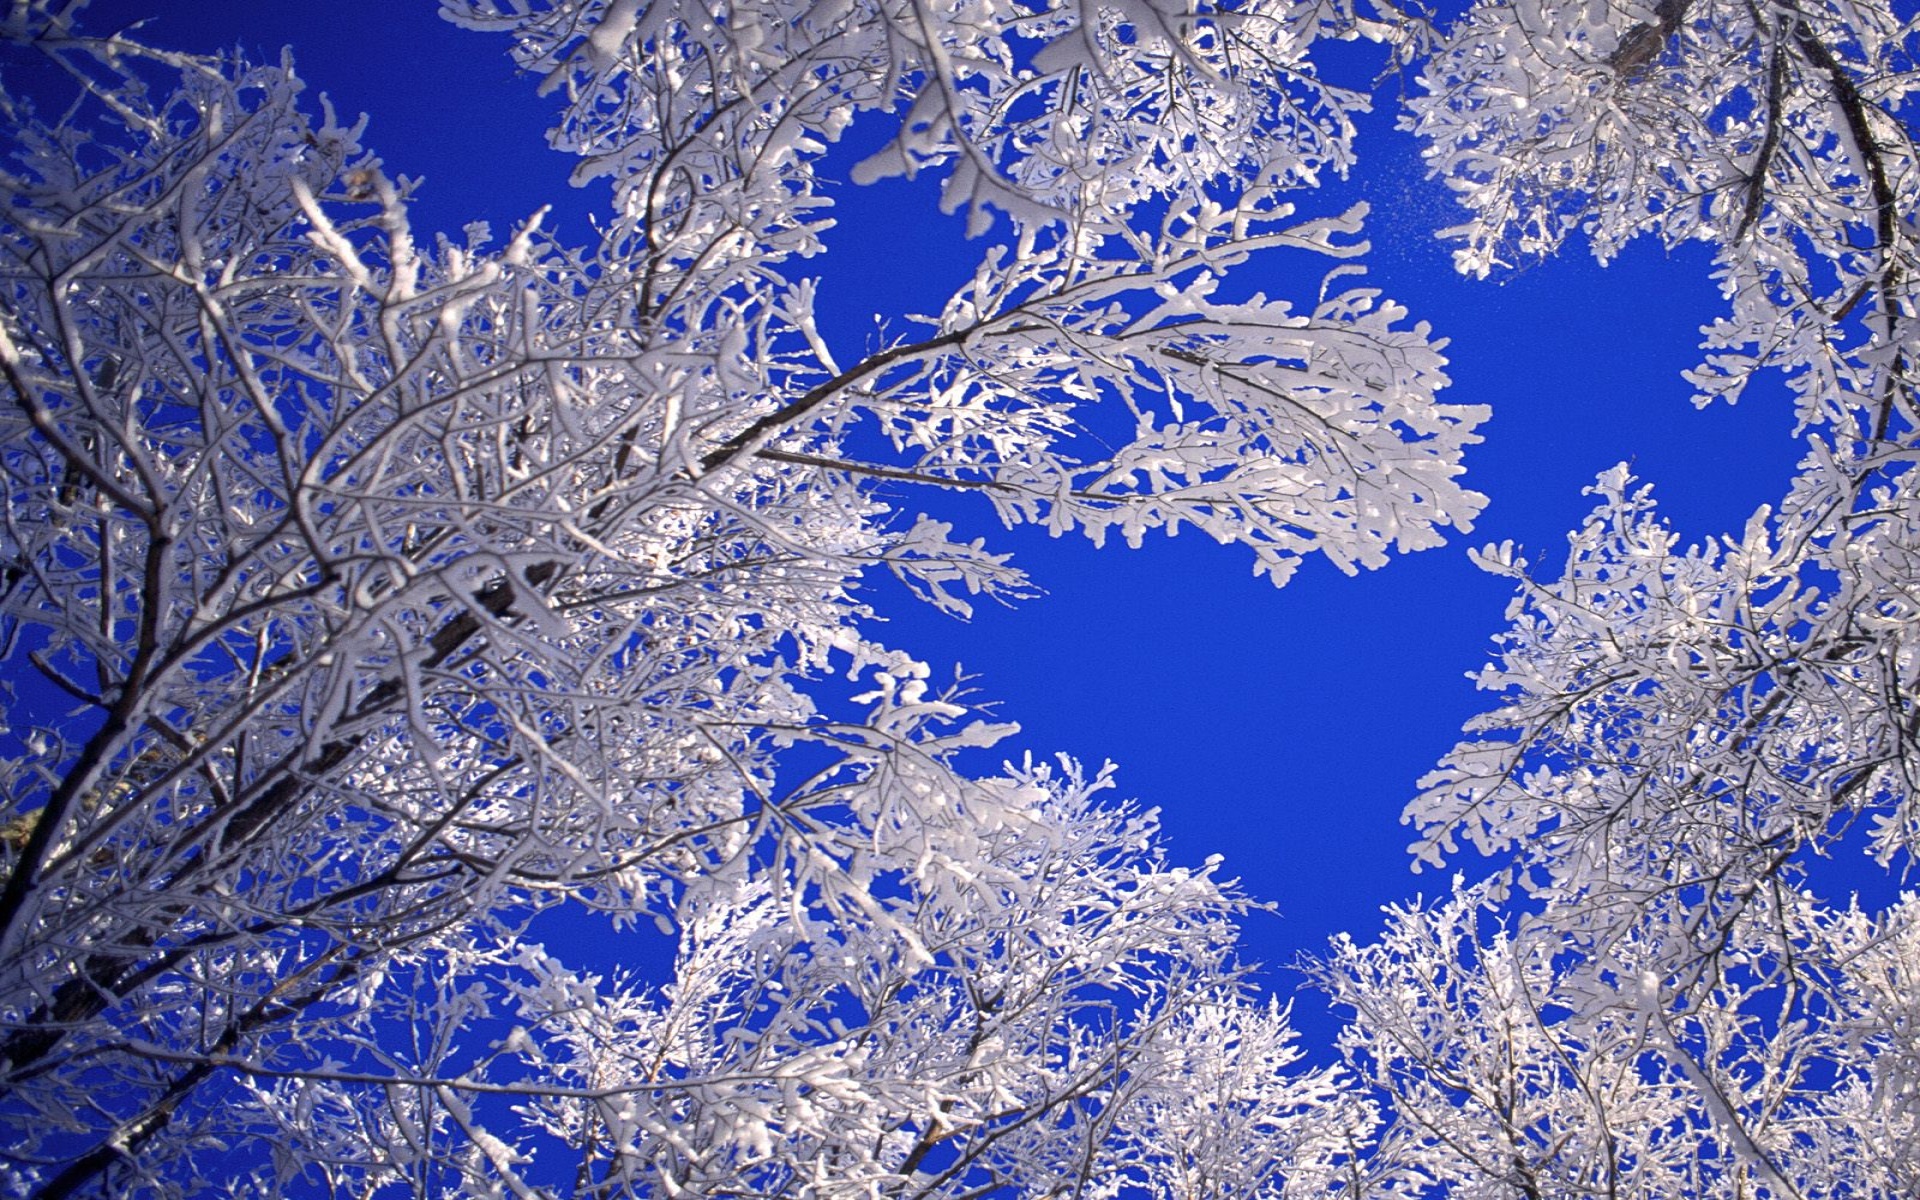 Frosted Trees, Boulder, Colorado      I